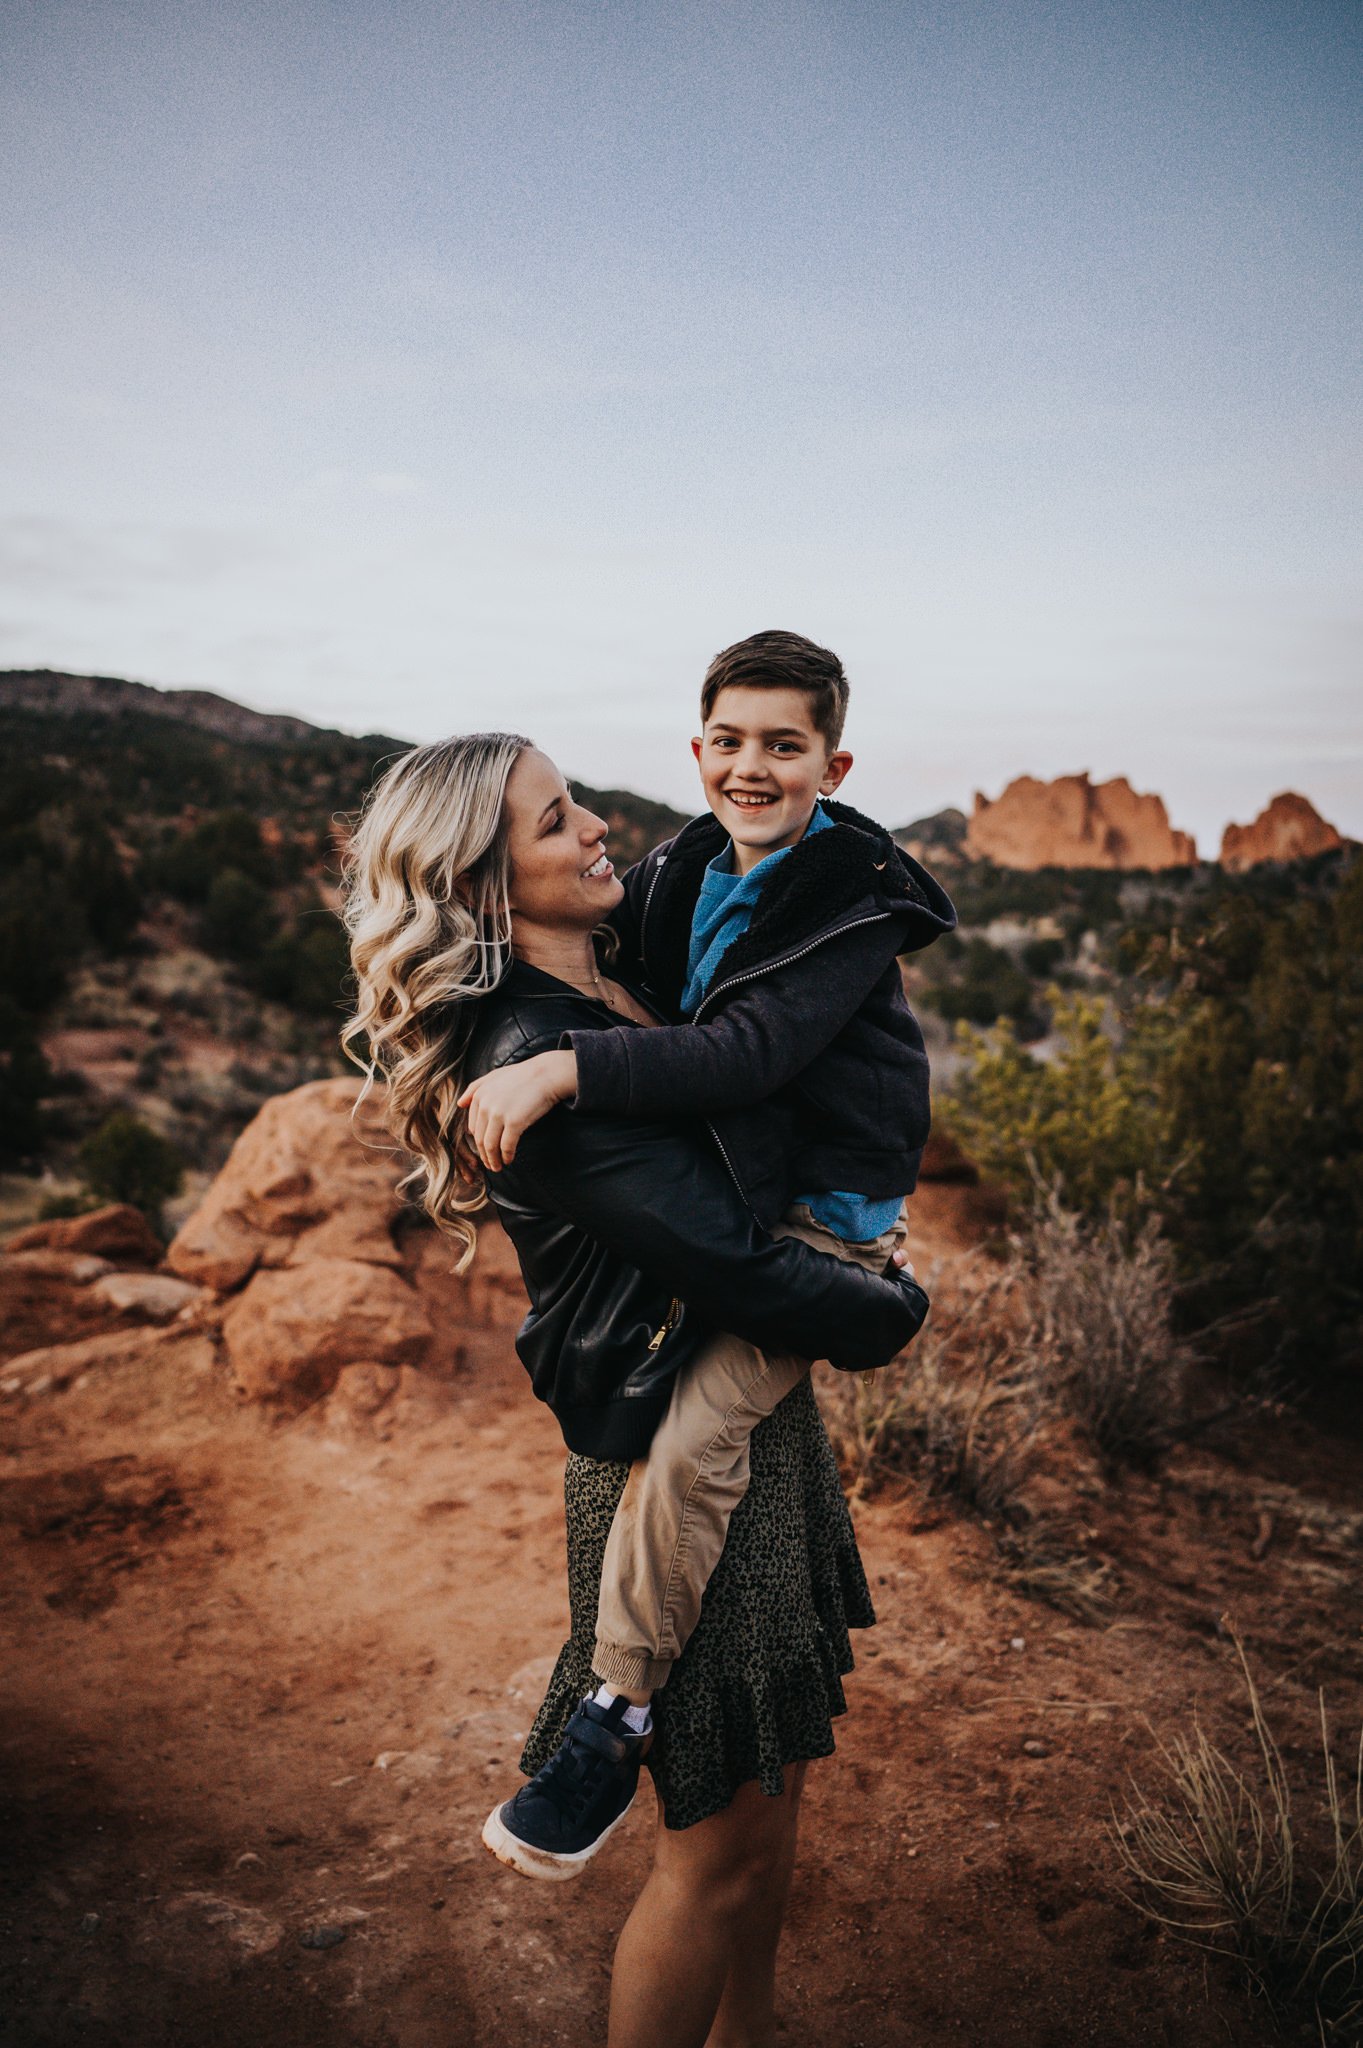 AnneMarie Jameson Family Session Colorado Springs Colorado Photographer Garden of the Gods Sunset Mountain View Husband Wife Sons Daughter Wild Prairie Photography-36-2022.jpg